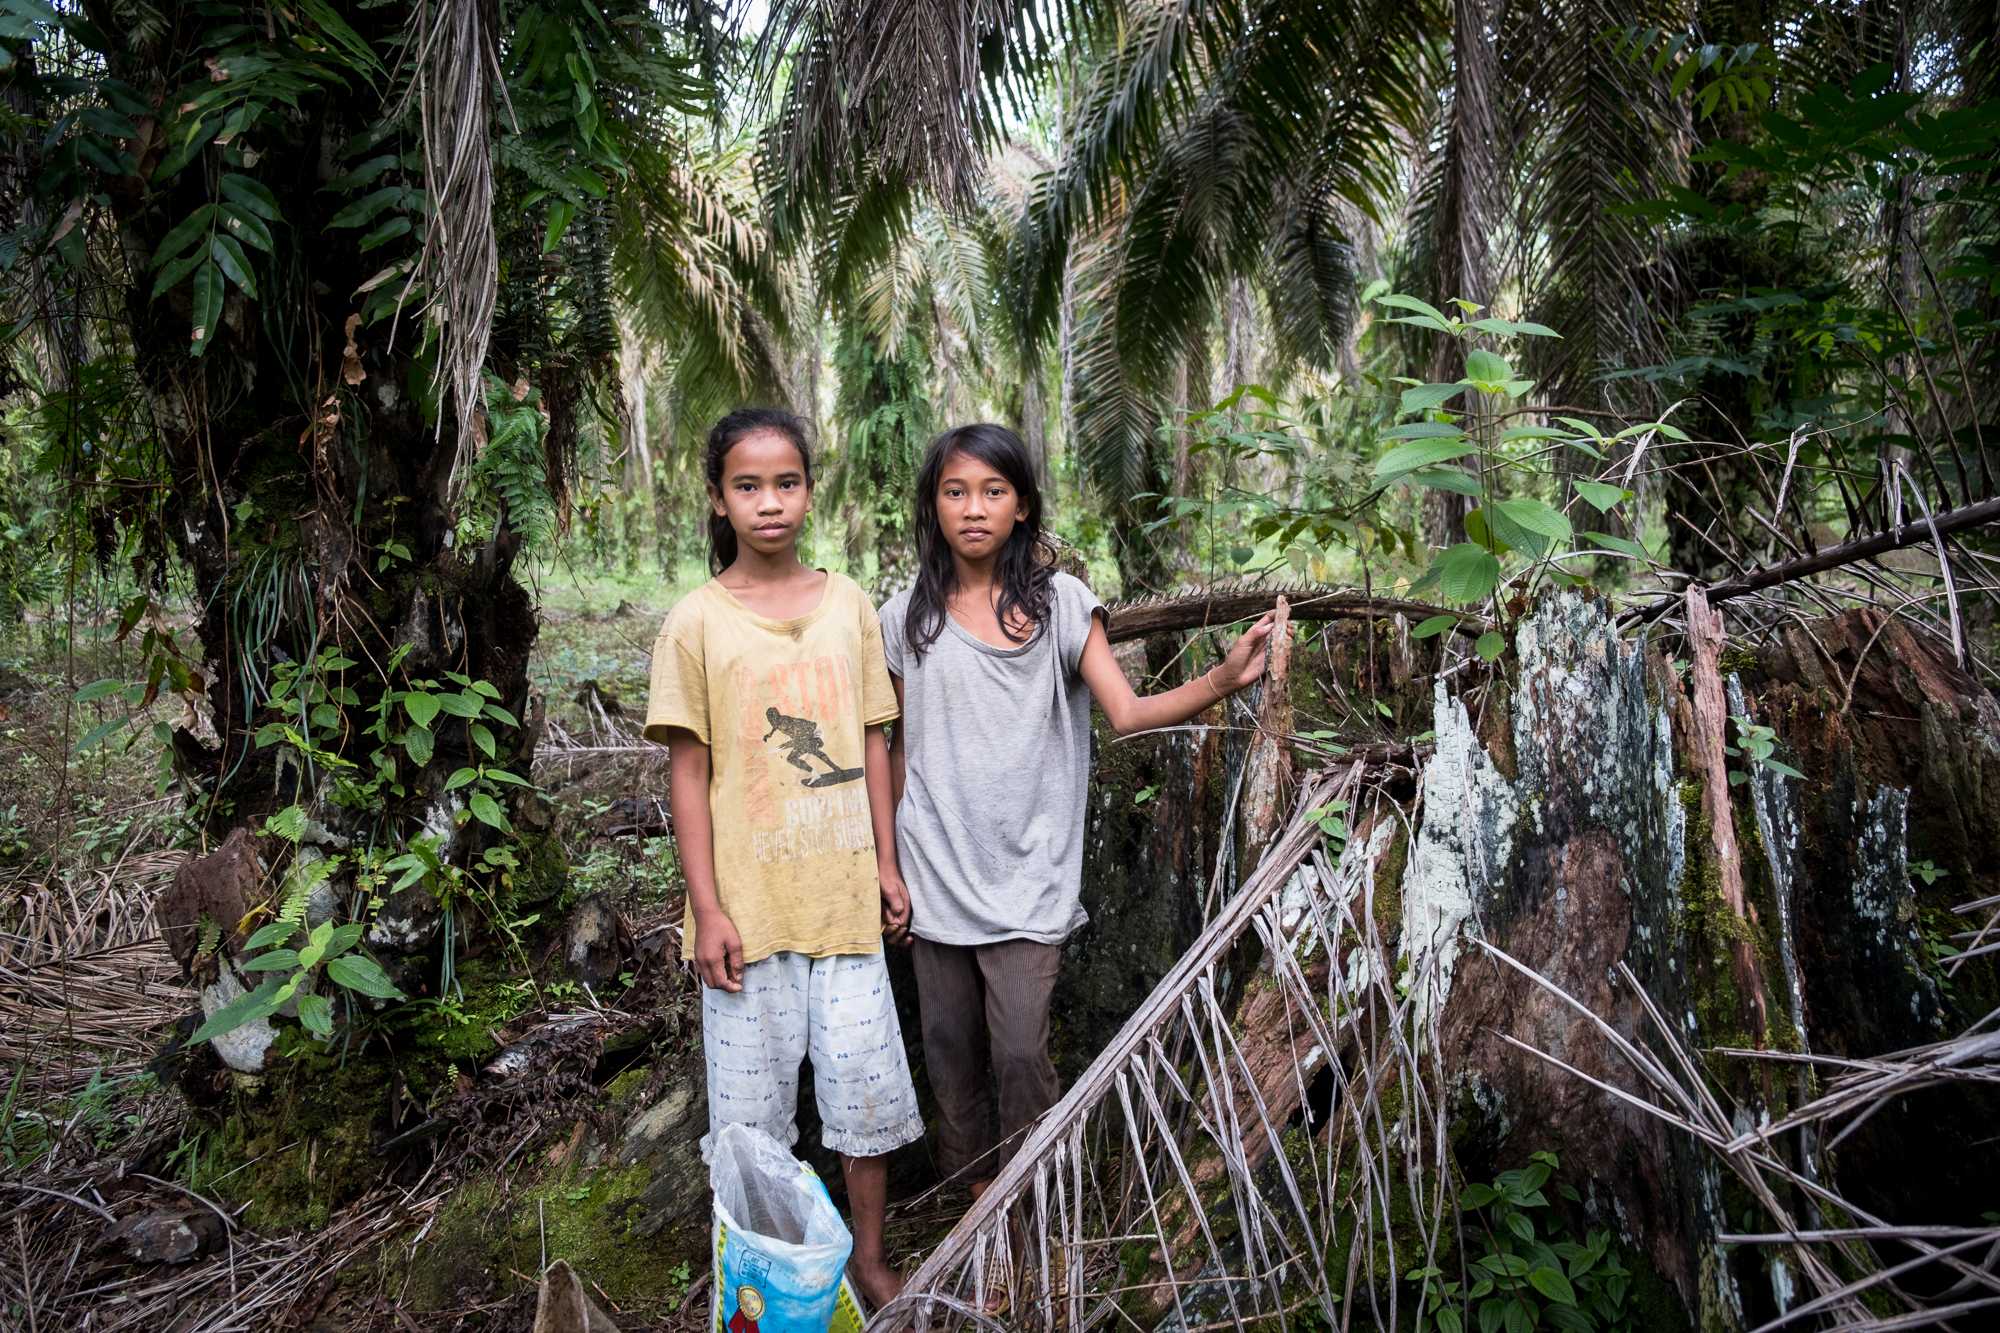 Yenita and Meriyana, Suku Anak Dalam in their early teens, say they have never attended school. They help their families gather loose oil palm fruitlets.